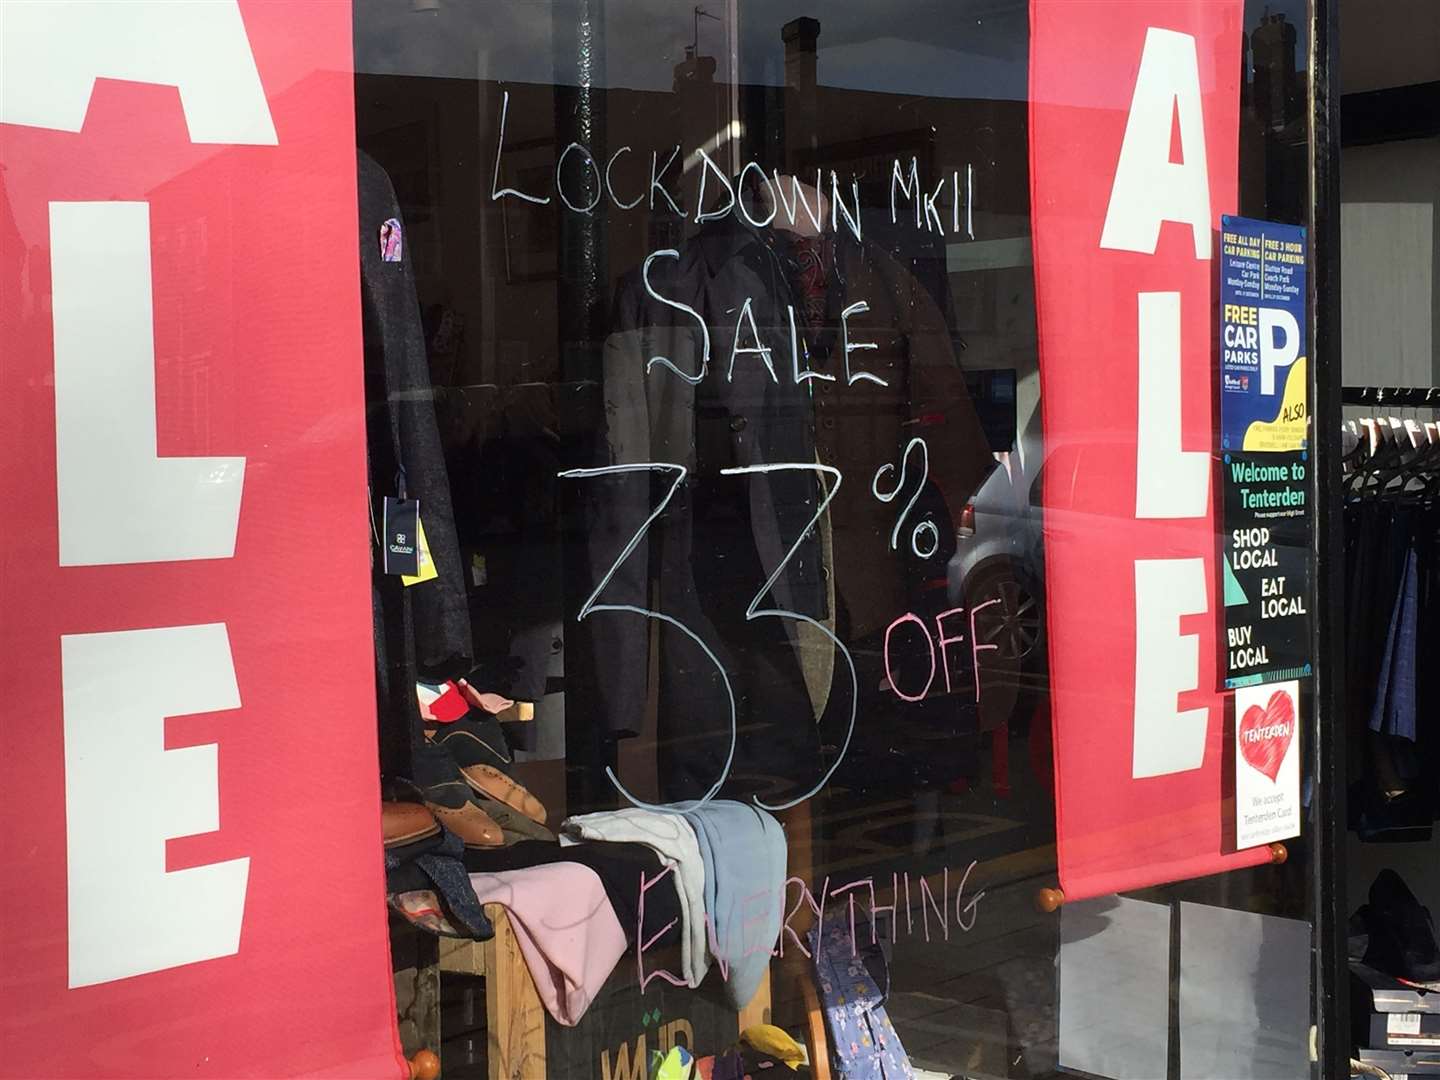 WUD was one of many shops to offer a pre-lockdown discount